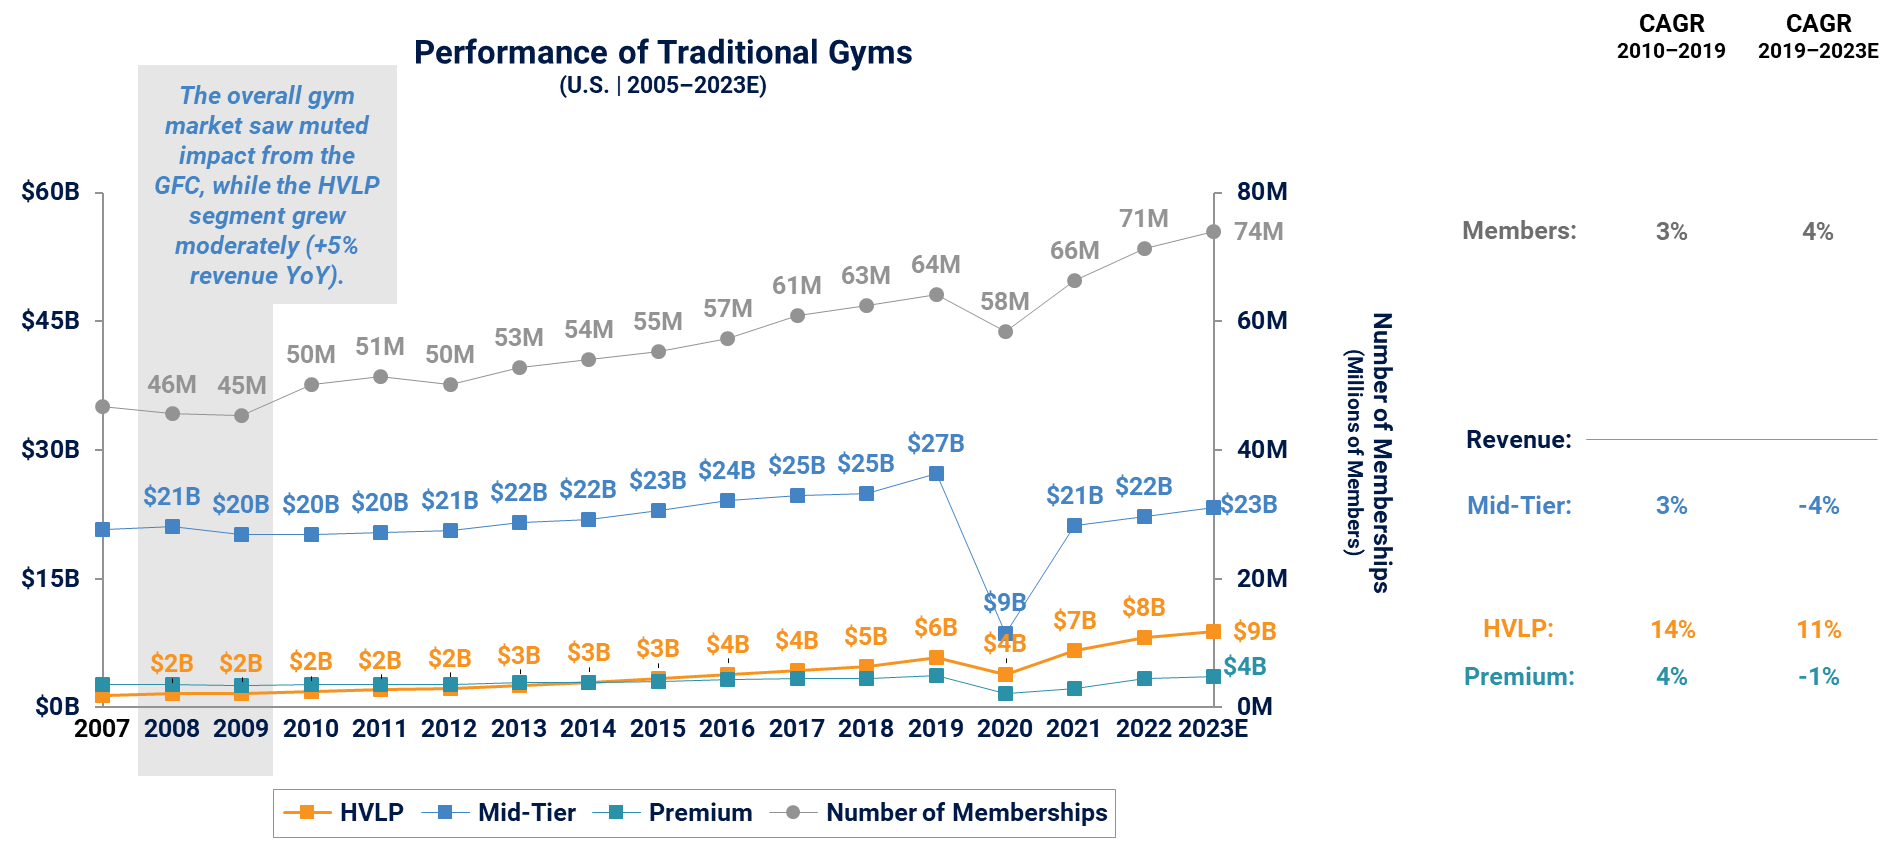 A graph displaying the performance of traditional gyms from 2005-2023, including metrics such as CAGR, types of gyms, and number of memberships for each year.